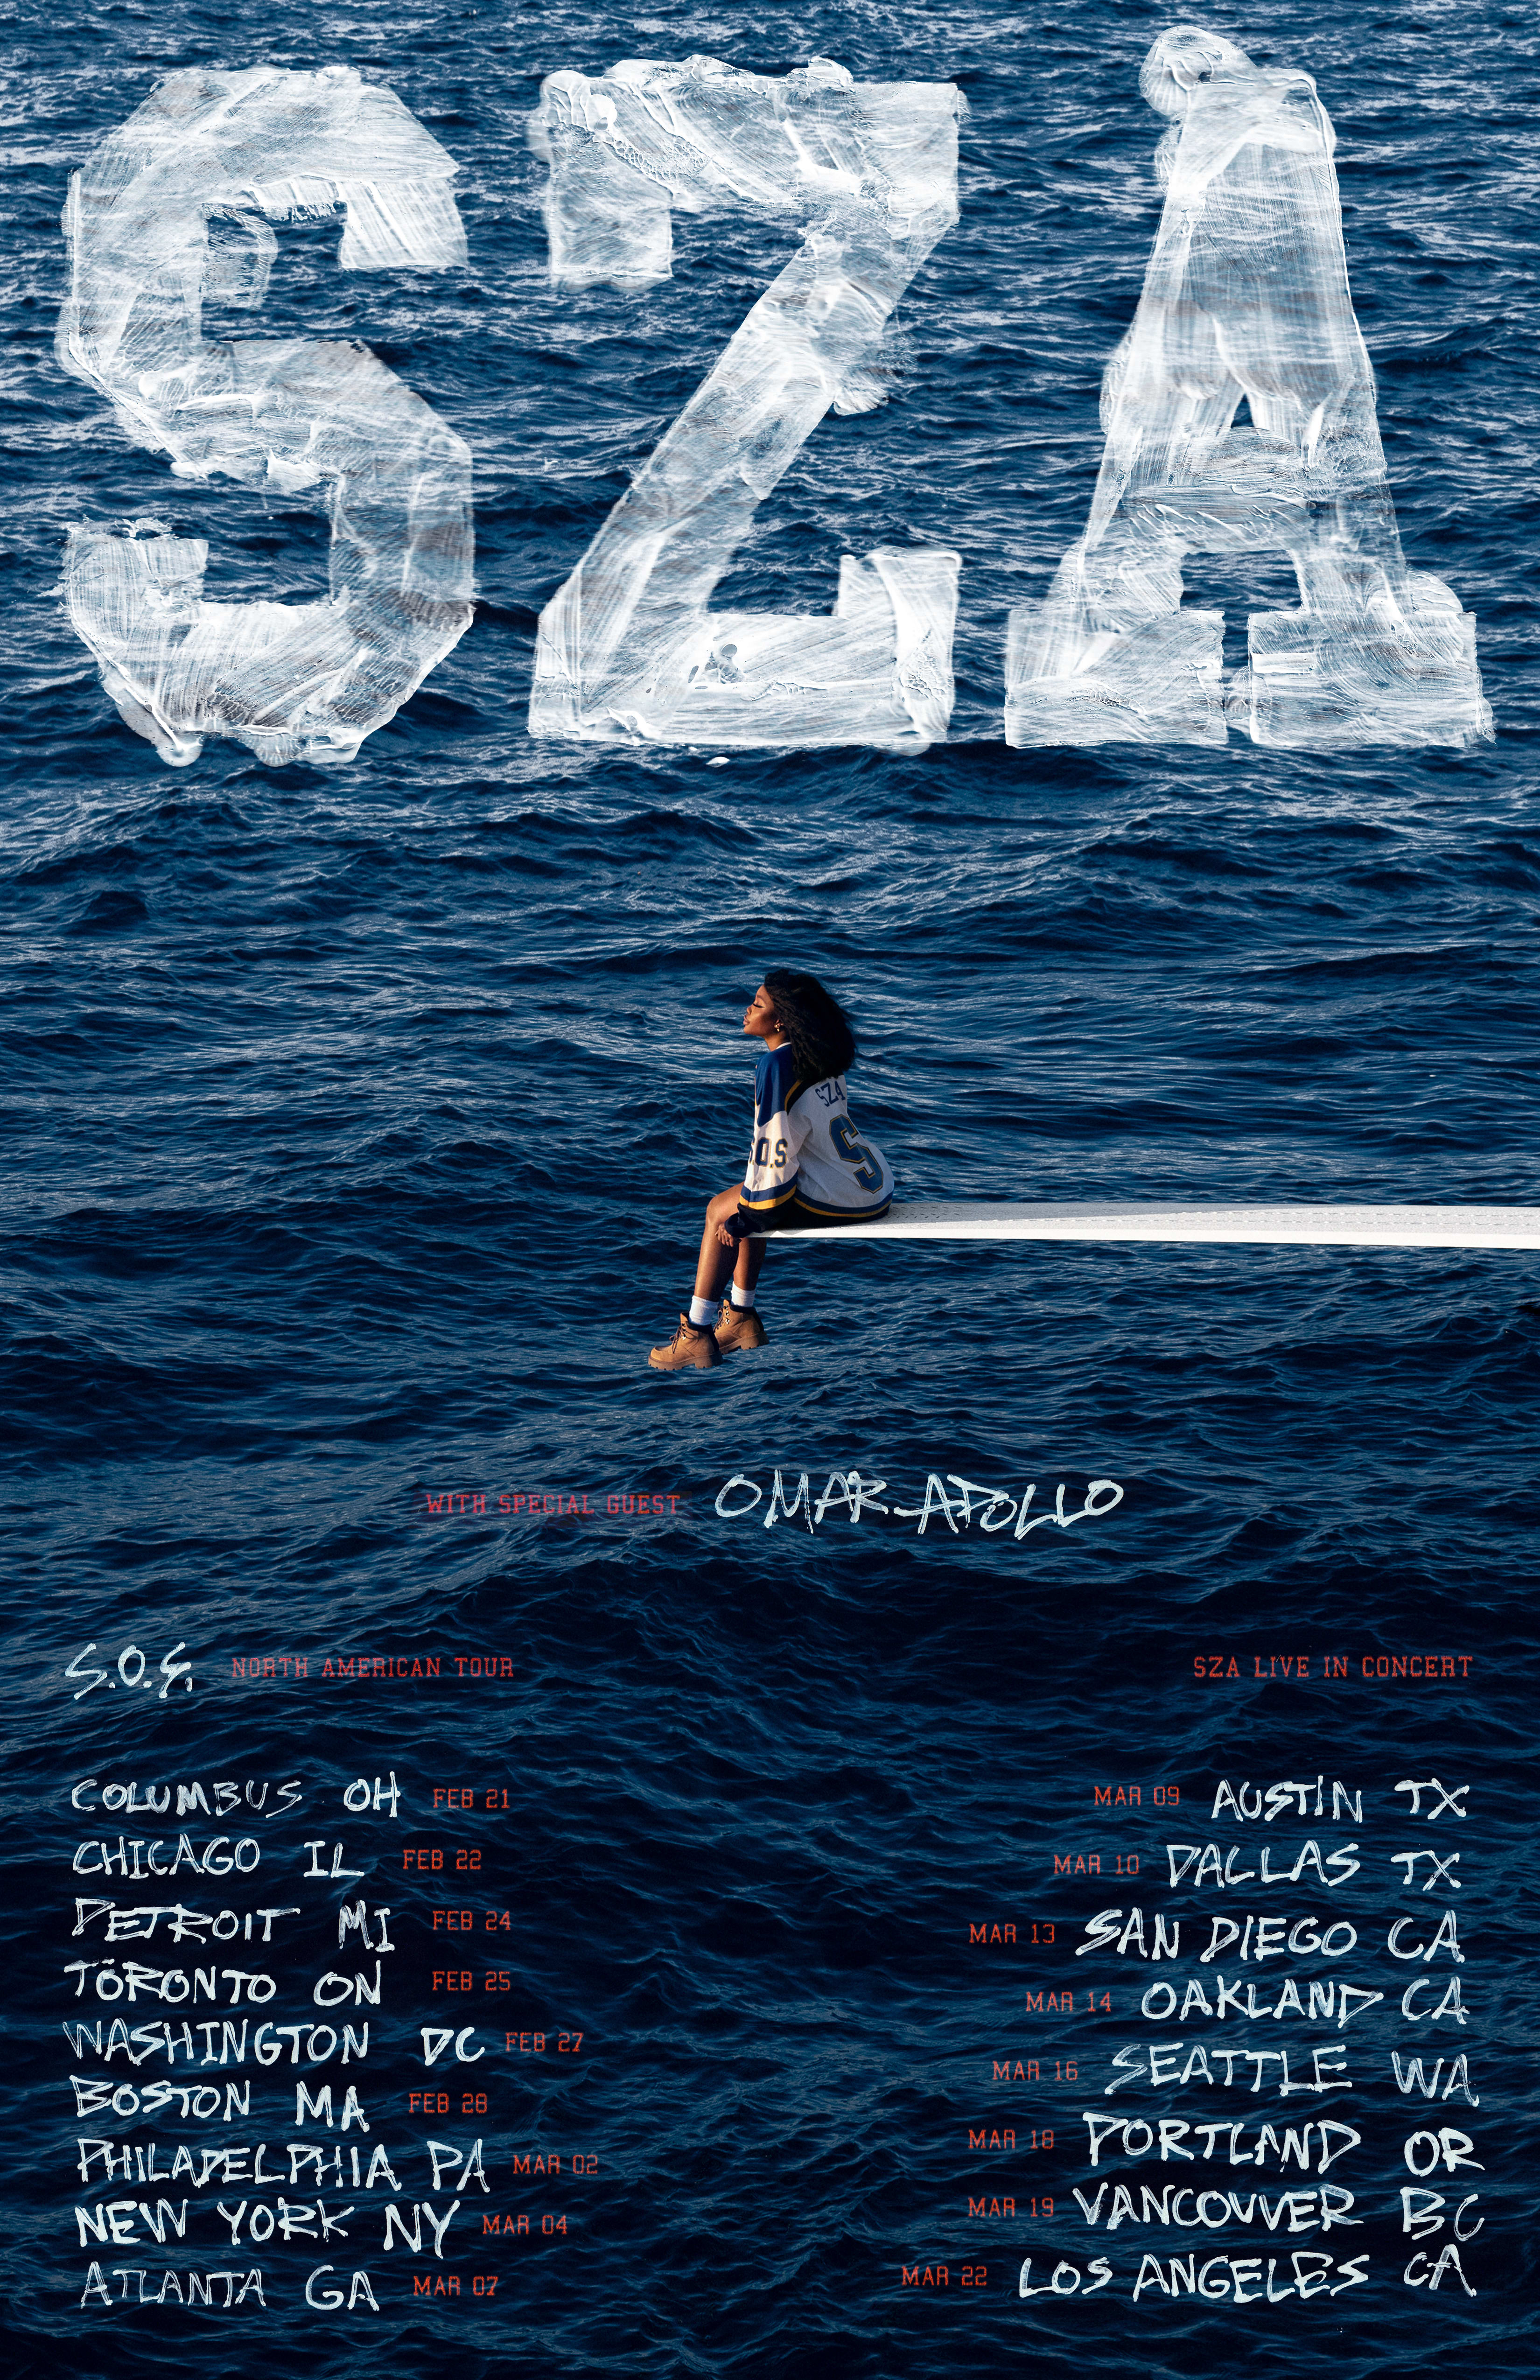 SZA flyer for new tour is pictured